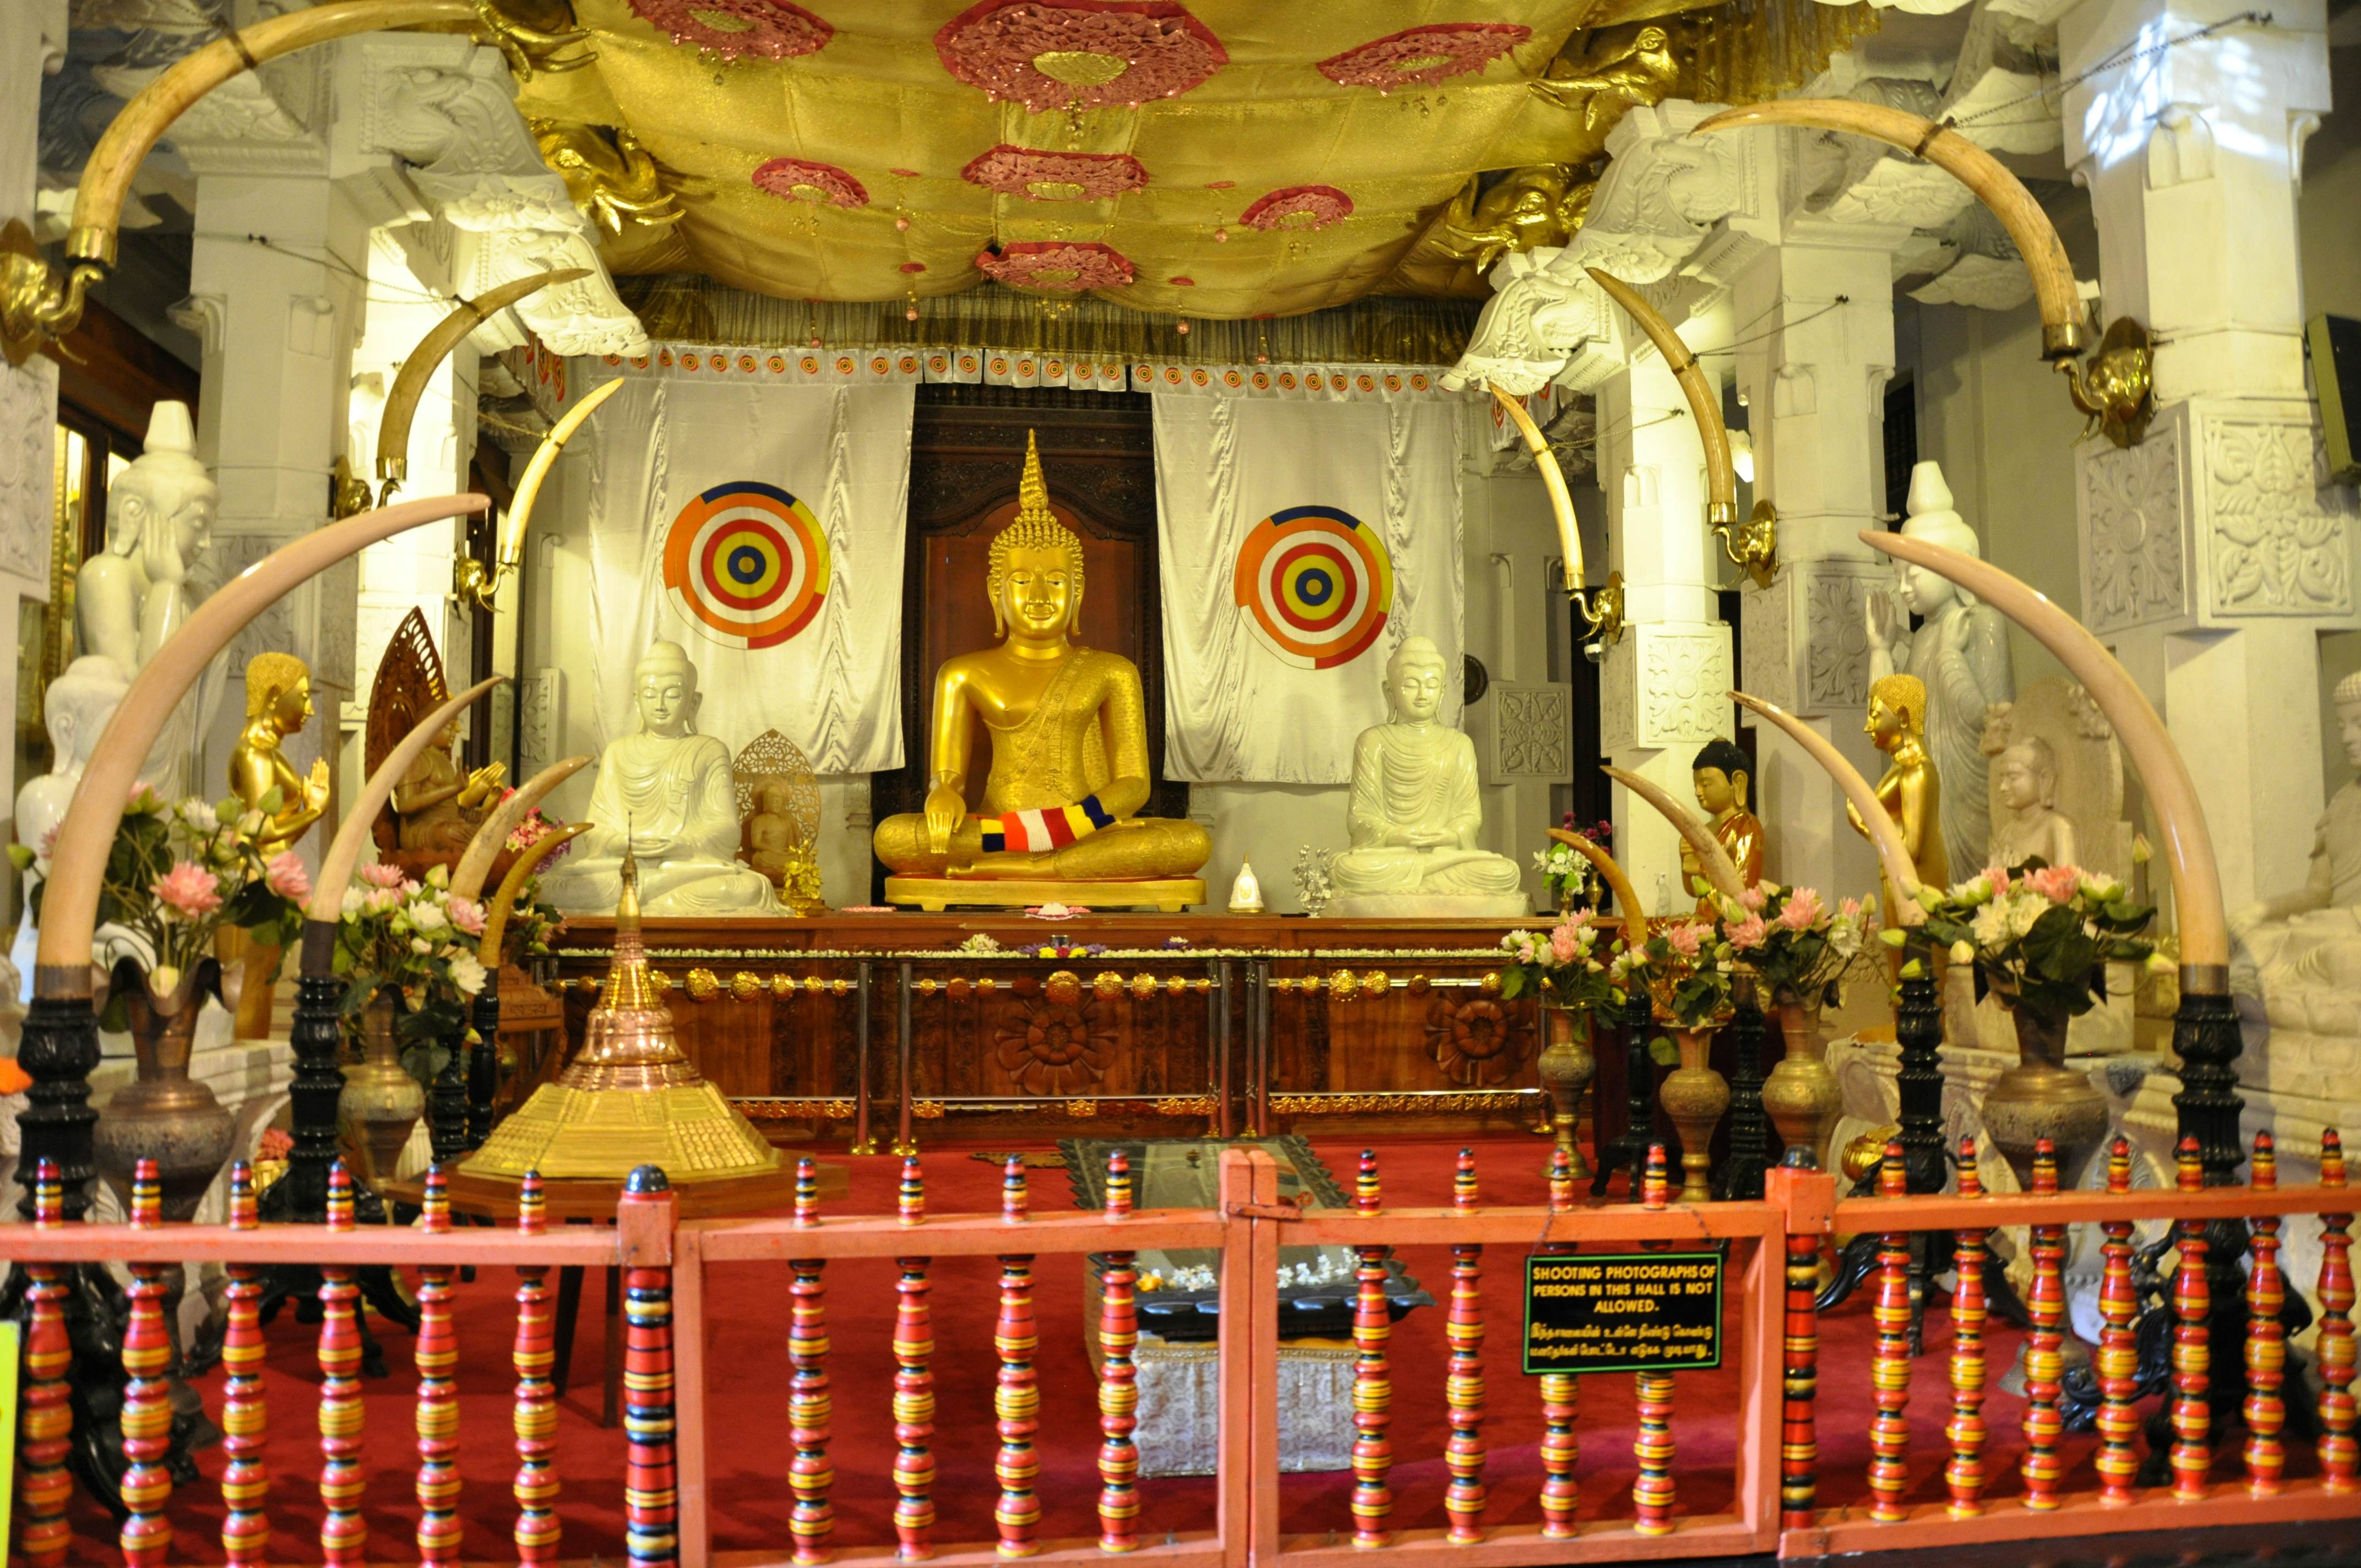 Kandy Temple of tooth- Entrance Fee 8 USD Per Person Pay Directly